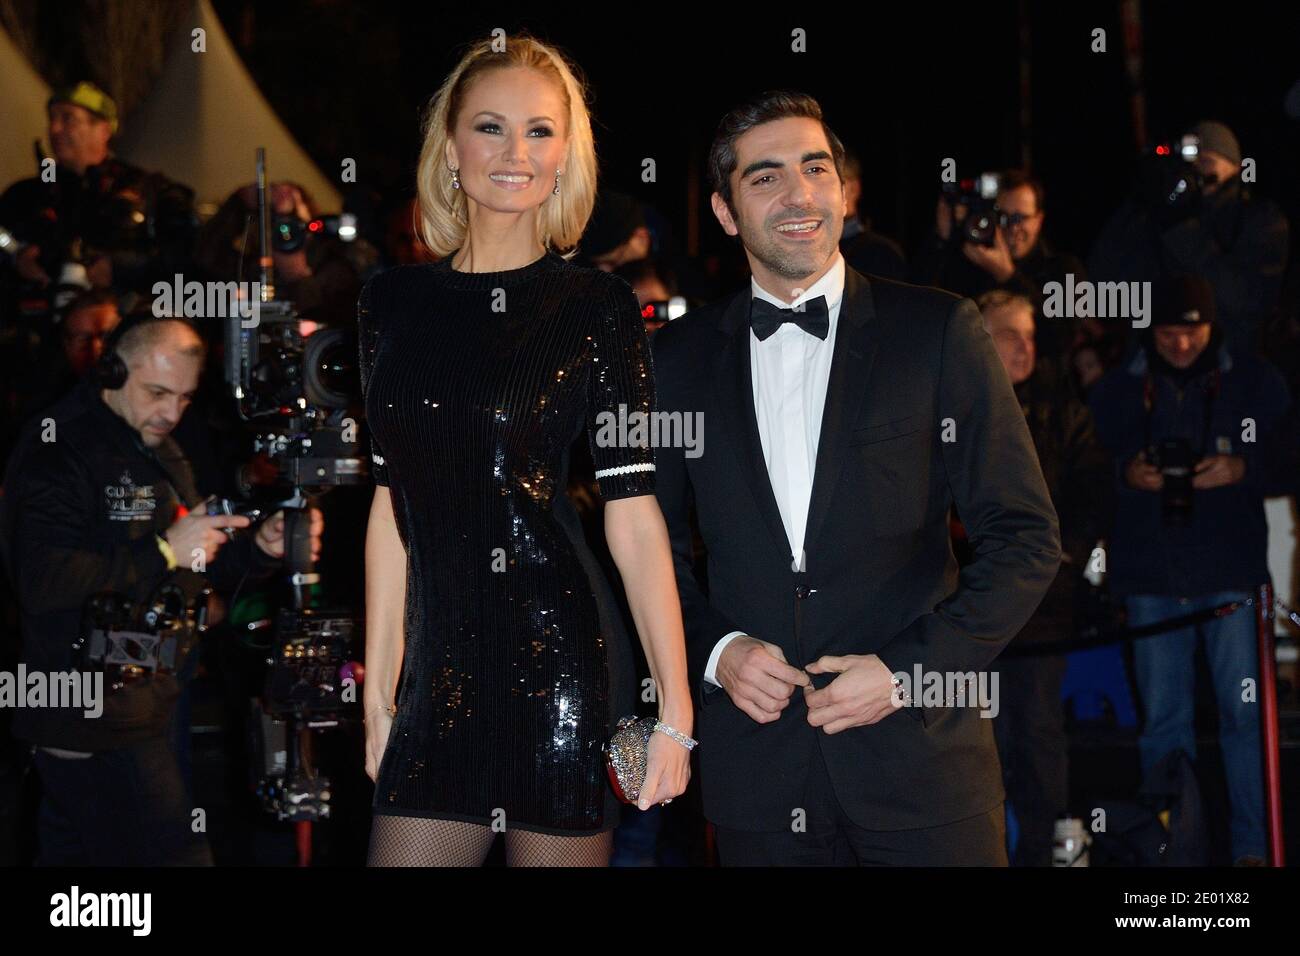 Ary Abittan and Adriana Karembeu attending the 15th NRJ Music Awards held at the Palais des Festivals in Cannes, France on December 14, 2013. Photo by Nicolas Briquet/ABACAPRESS.COM Stock Photo